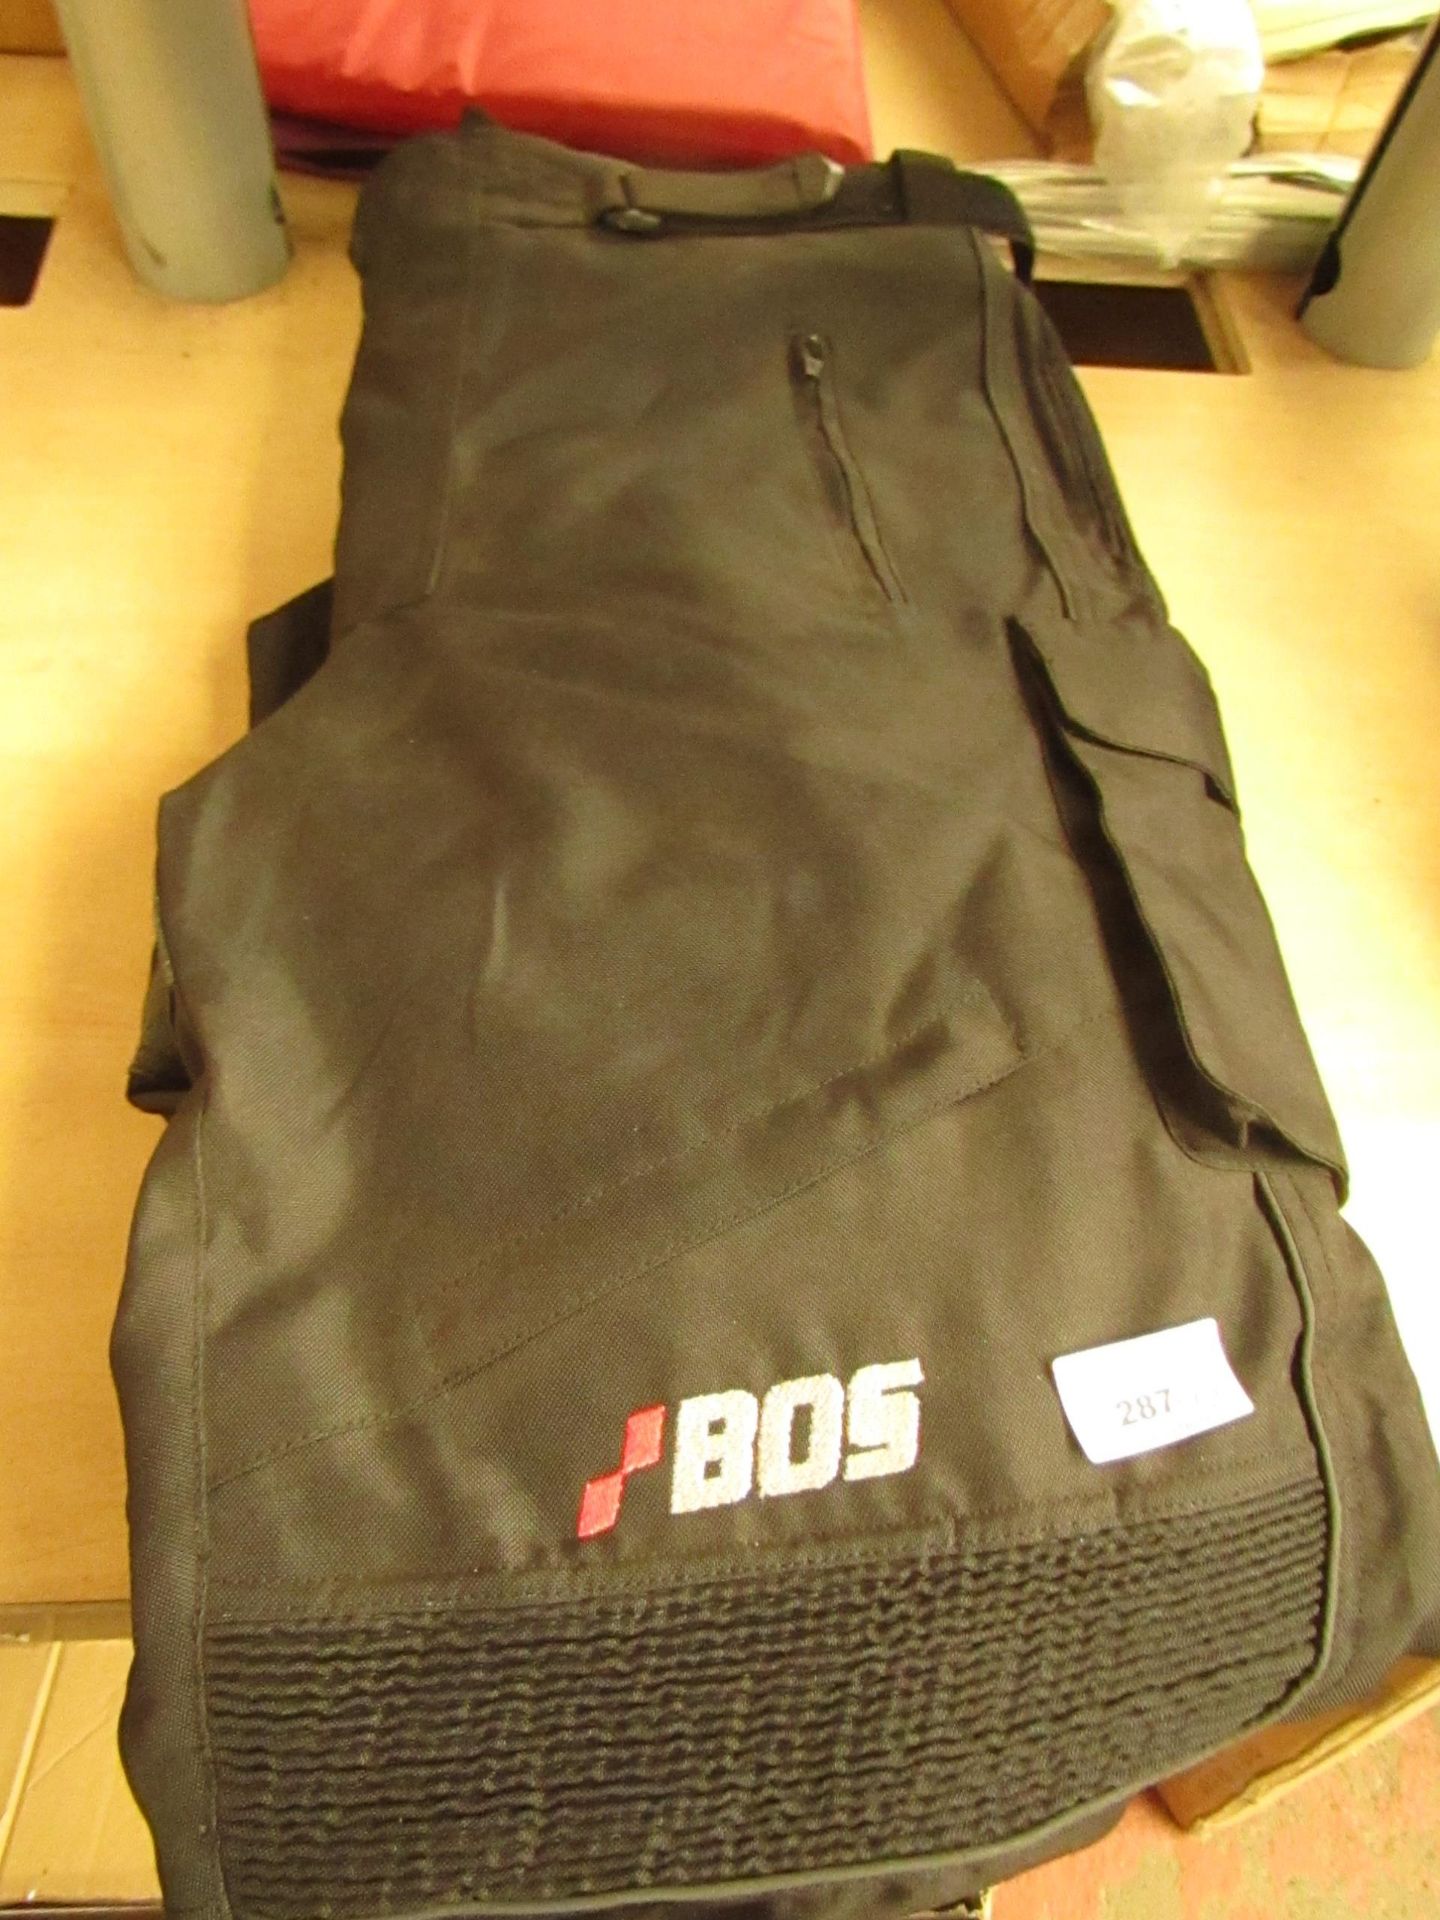 BOS - Texas Trouser Black CE Approved Impact Protectors - Size 3XL - Good Condition with Tags.